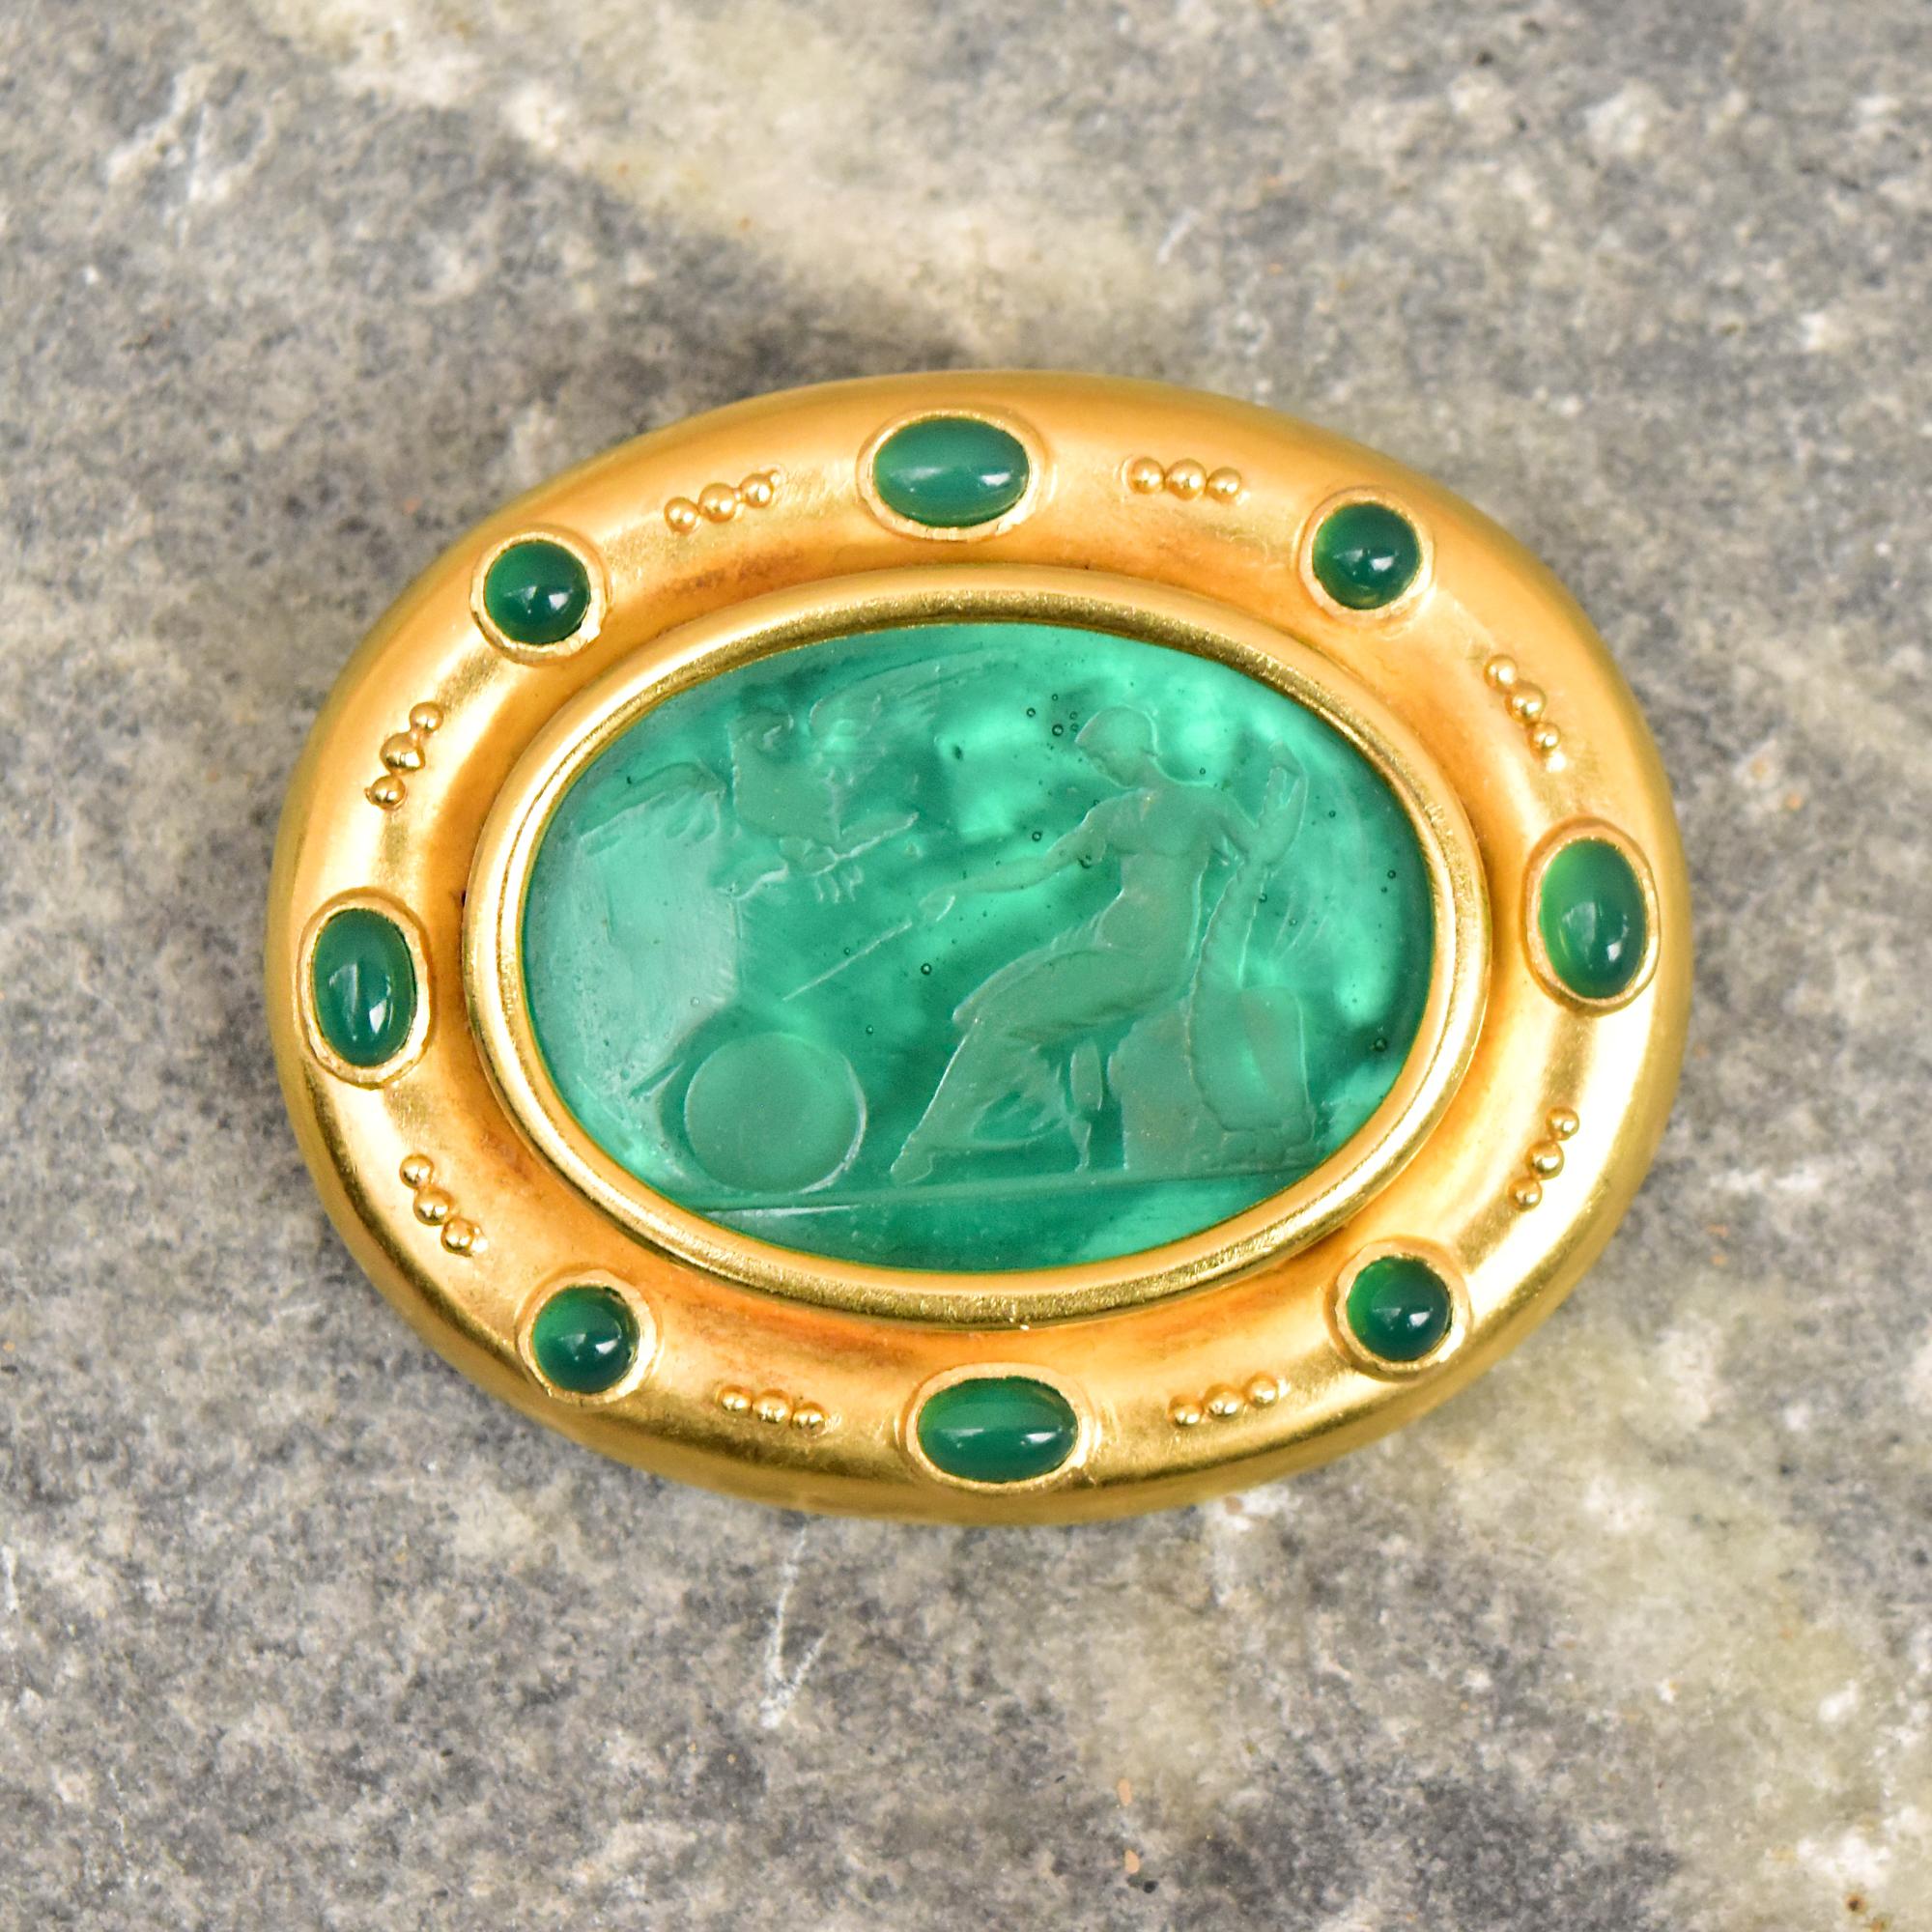 An incredible 18K venetian glass intaglio cameo brooch pendant by renowned jewelry designer Elizabeth Locke. Features a gorgeous carved green cameo set in a robust yellow gold oval frame with green cabochons decoration and gold bead accents.

The